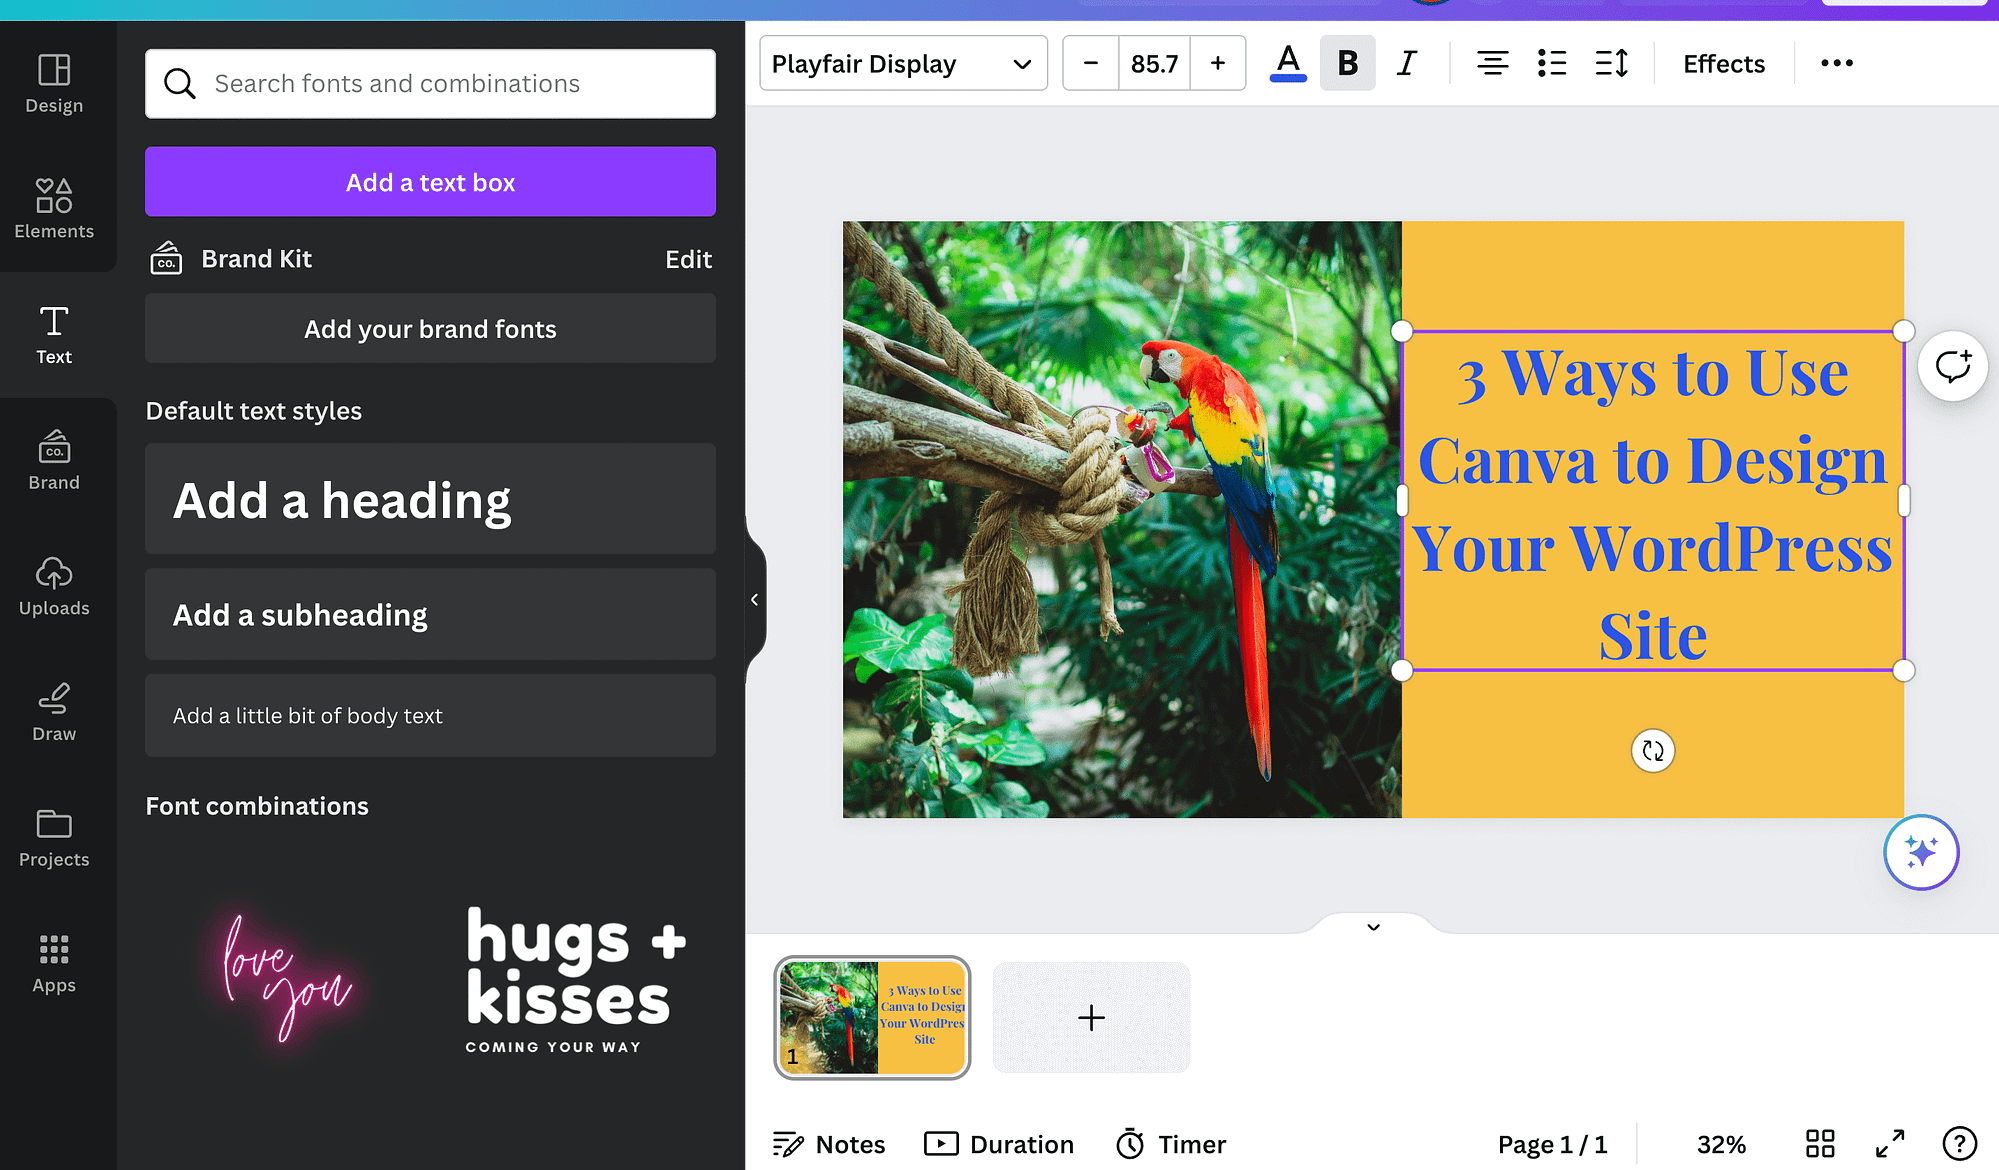 Customizing a featured image design in Canva